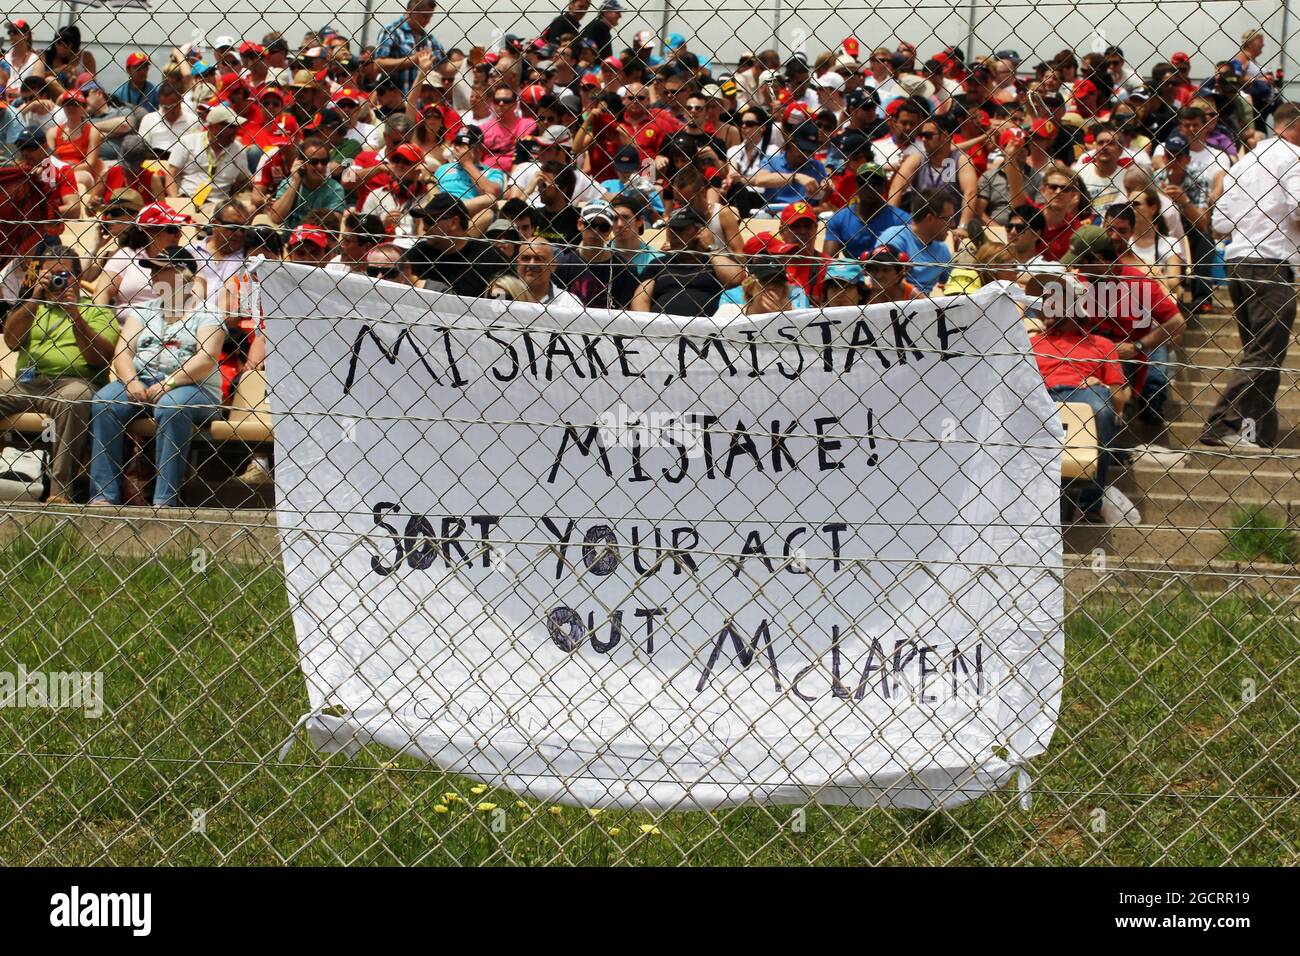 Banner criticising mistakes by McLaren. Spanish Grand Prix, Sunday 13th May 2012. Barcelona, Spain. Stock Photo